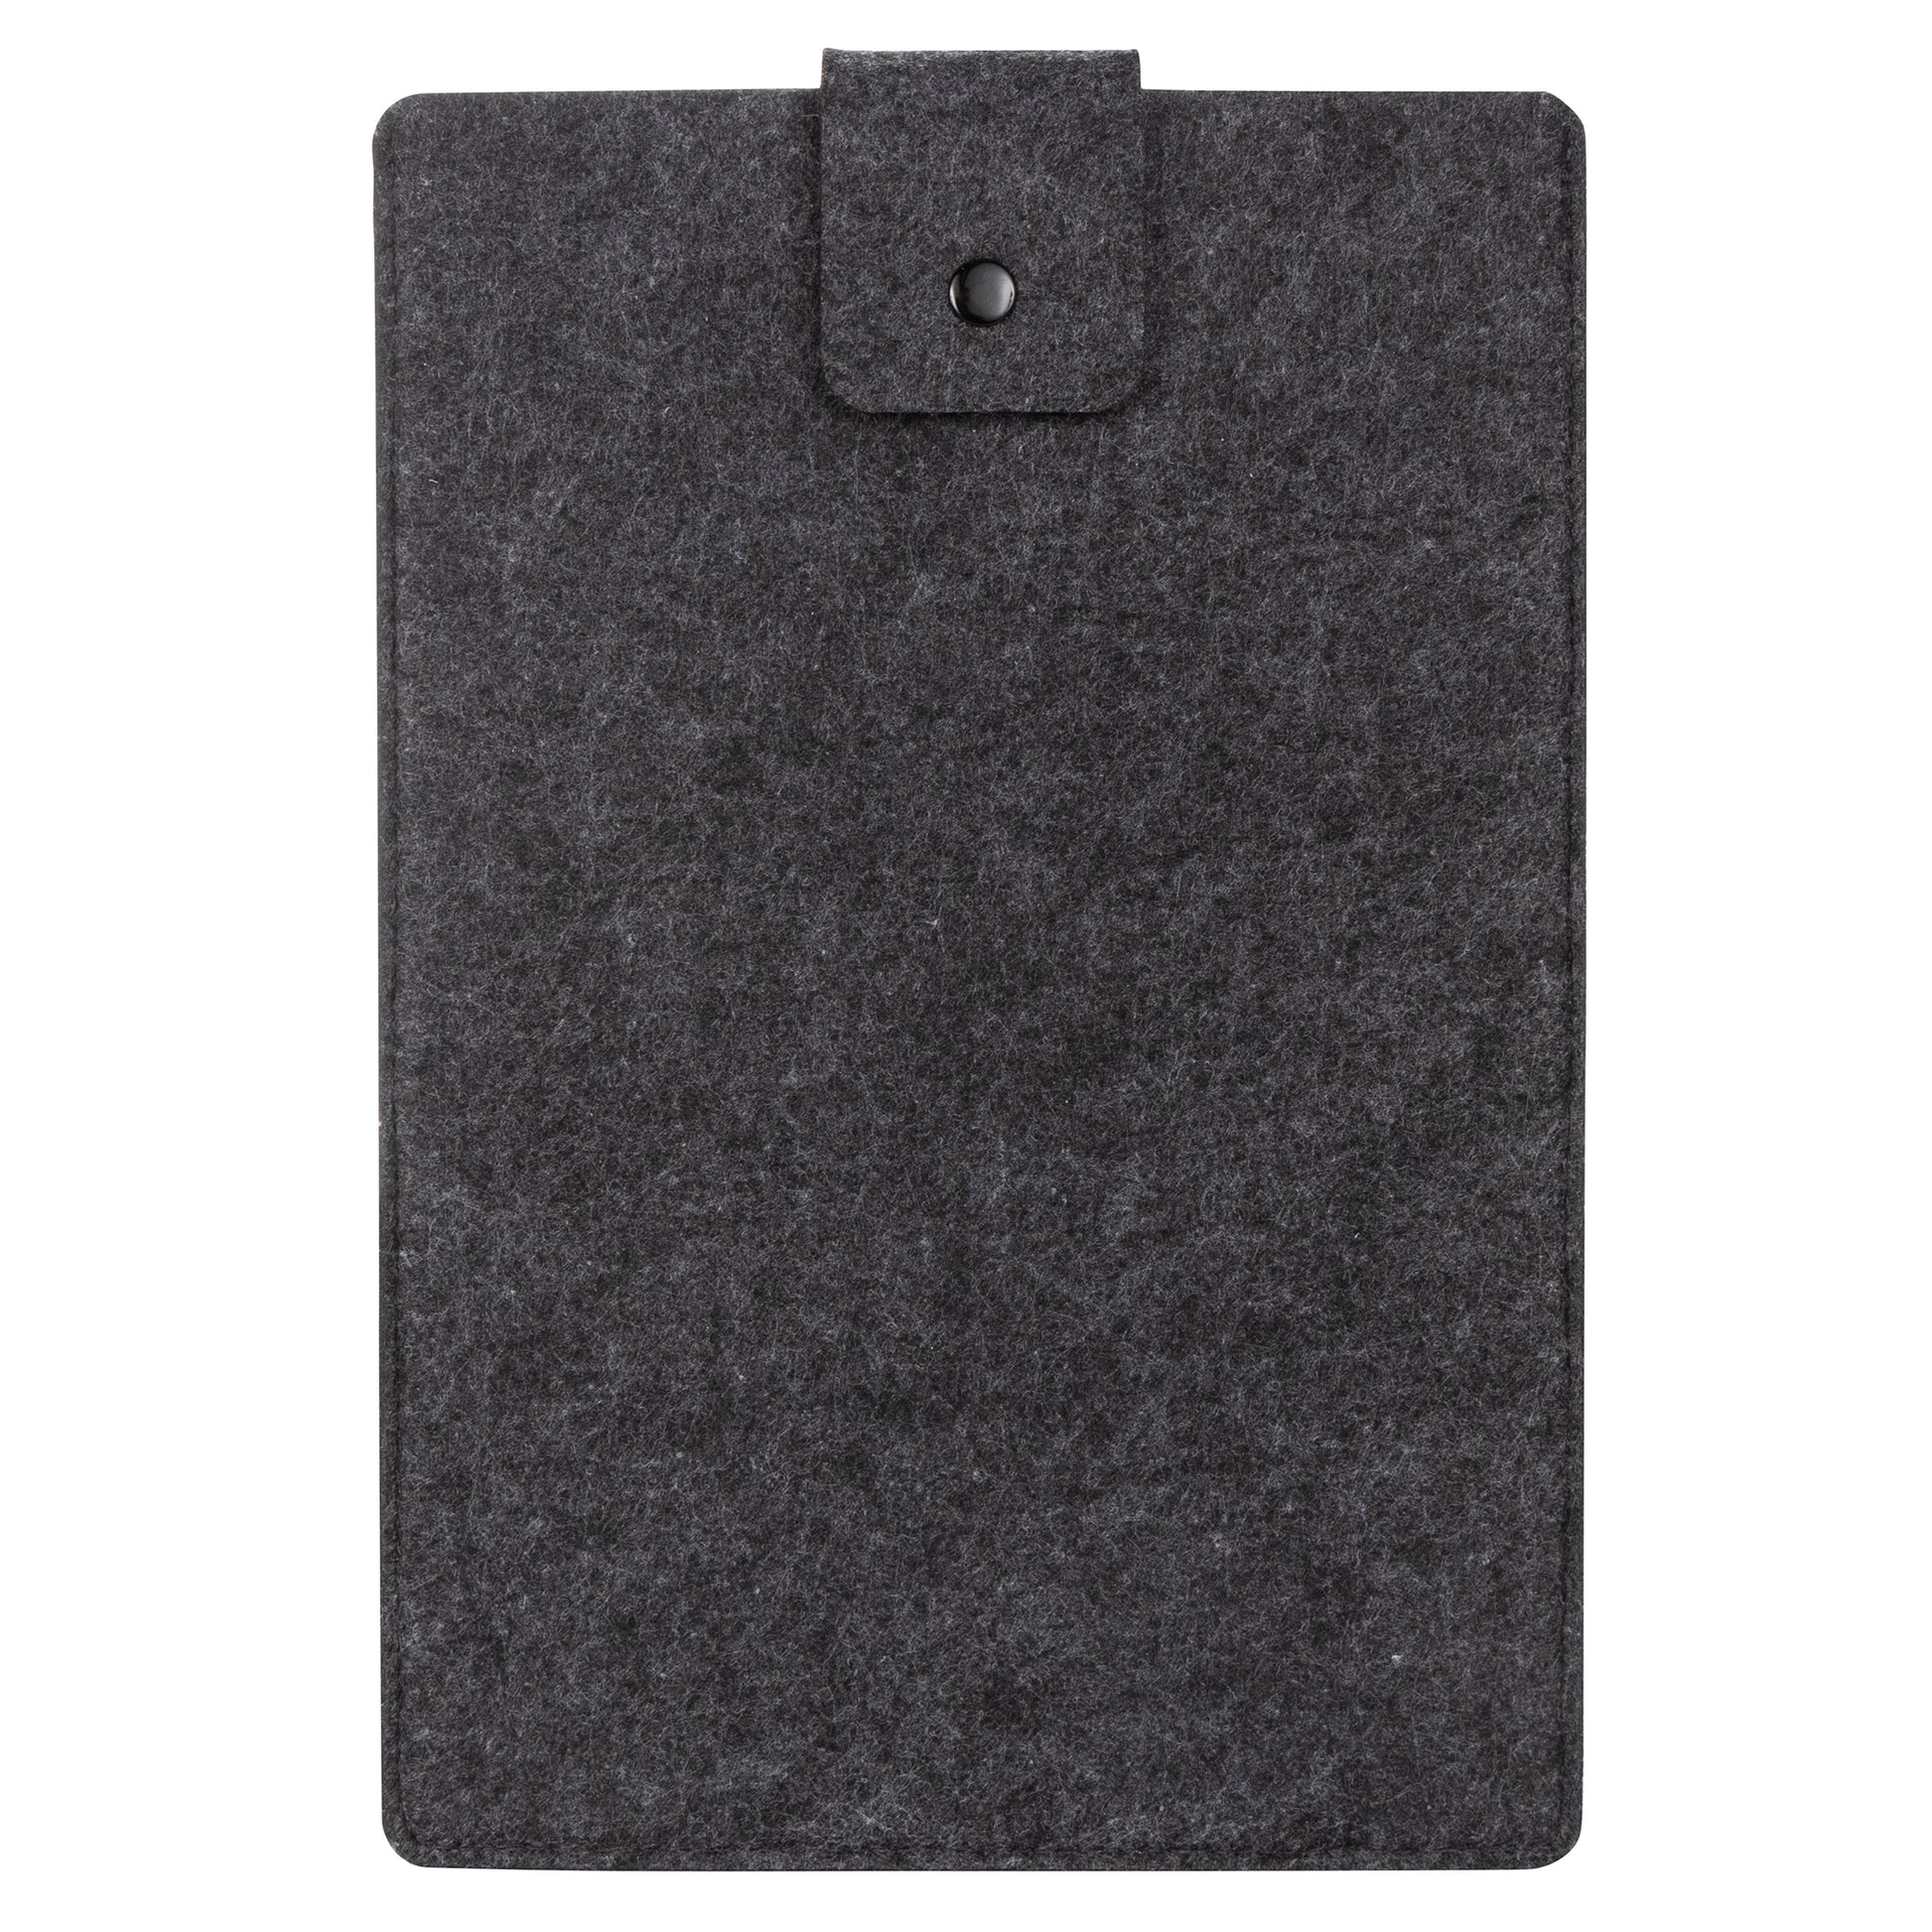 Charcoal Gray Felt Tablet Sleeve Carrying Case - front view with snap